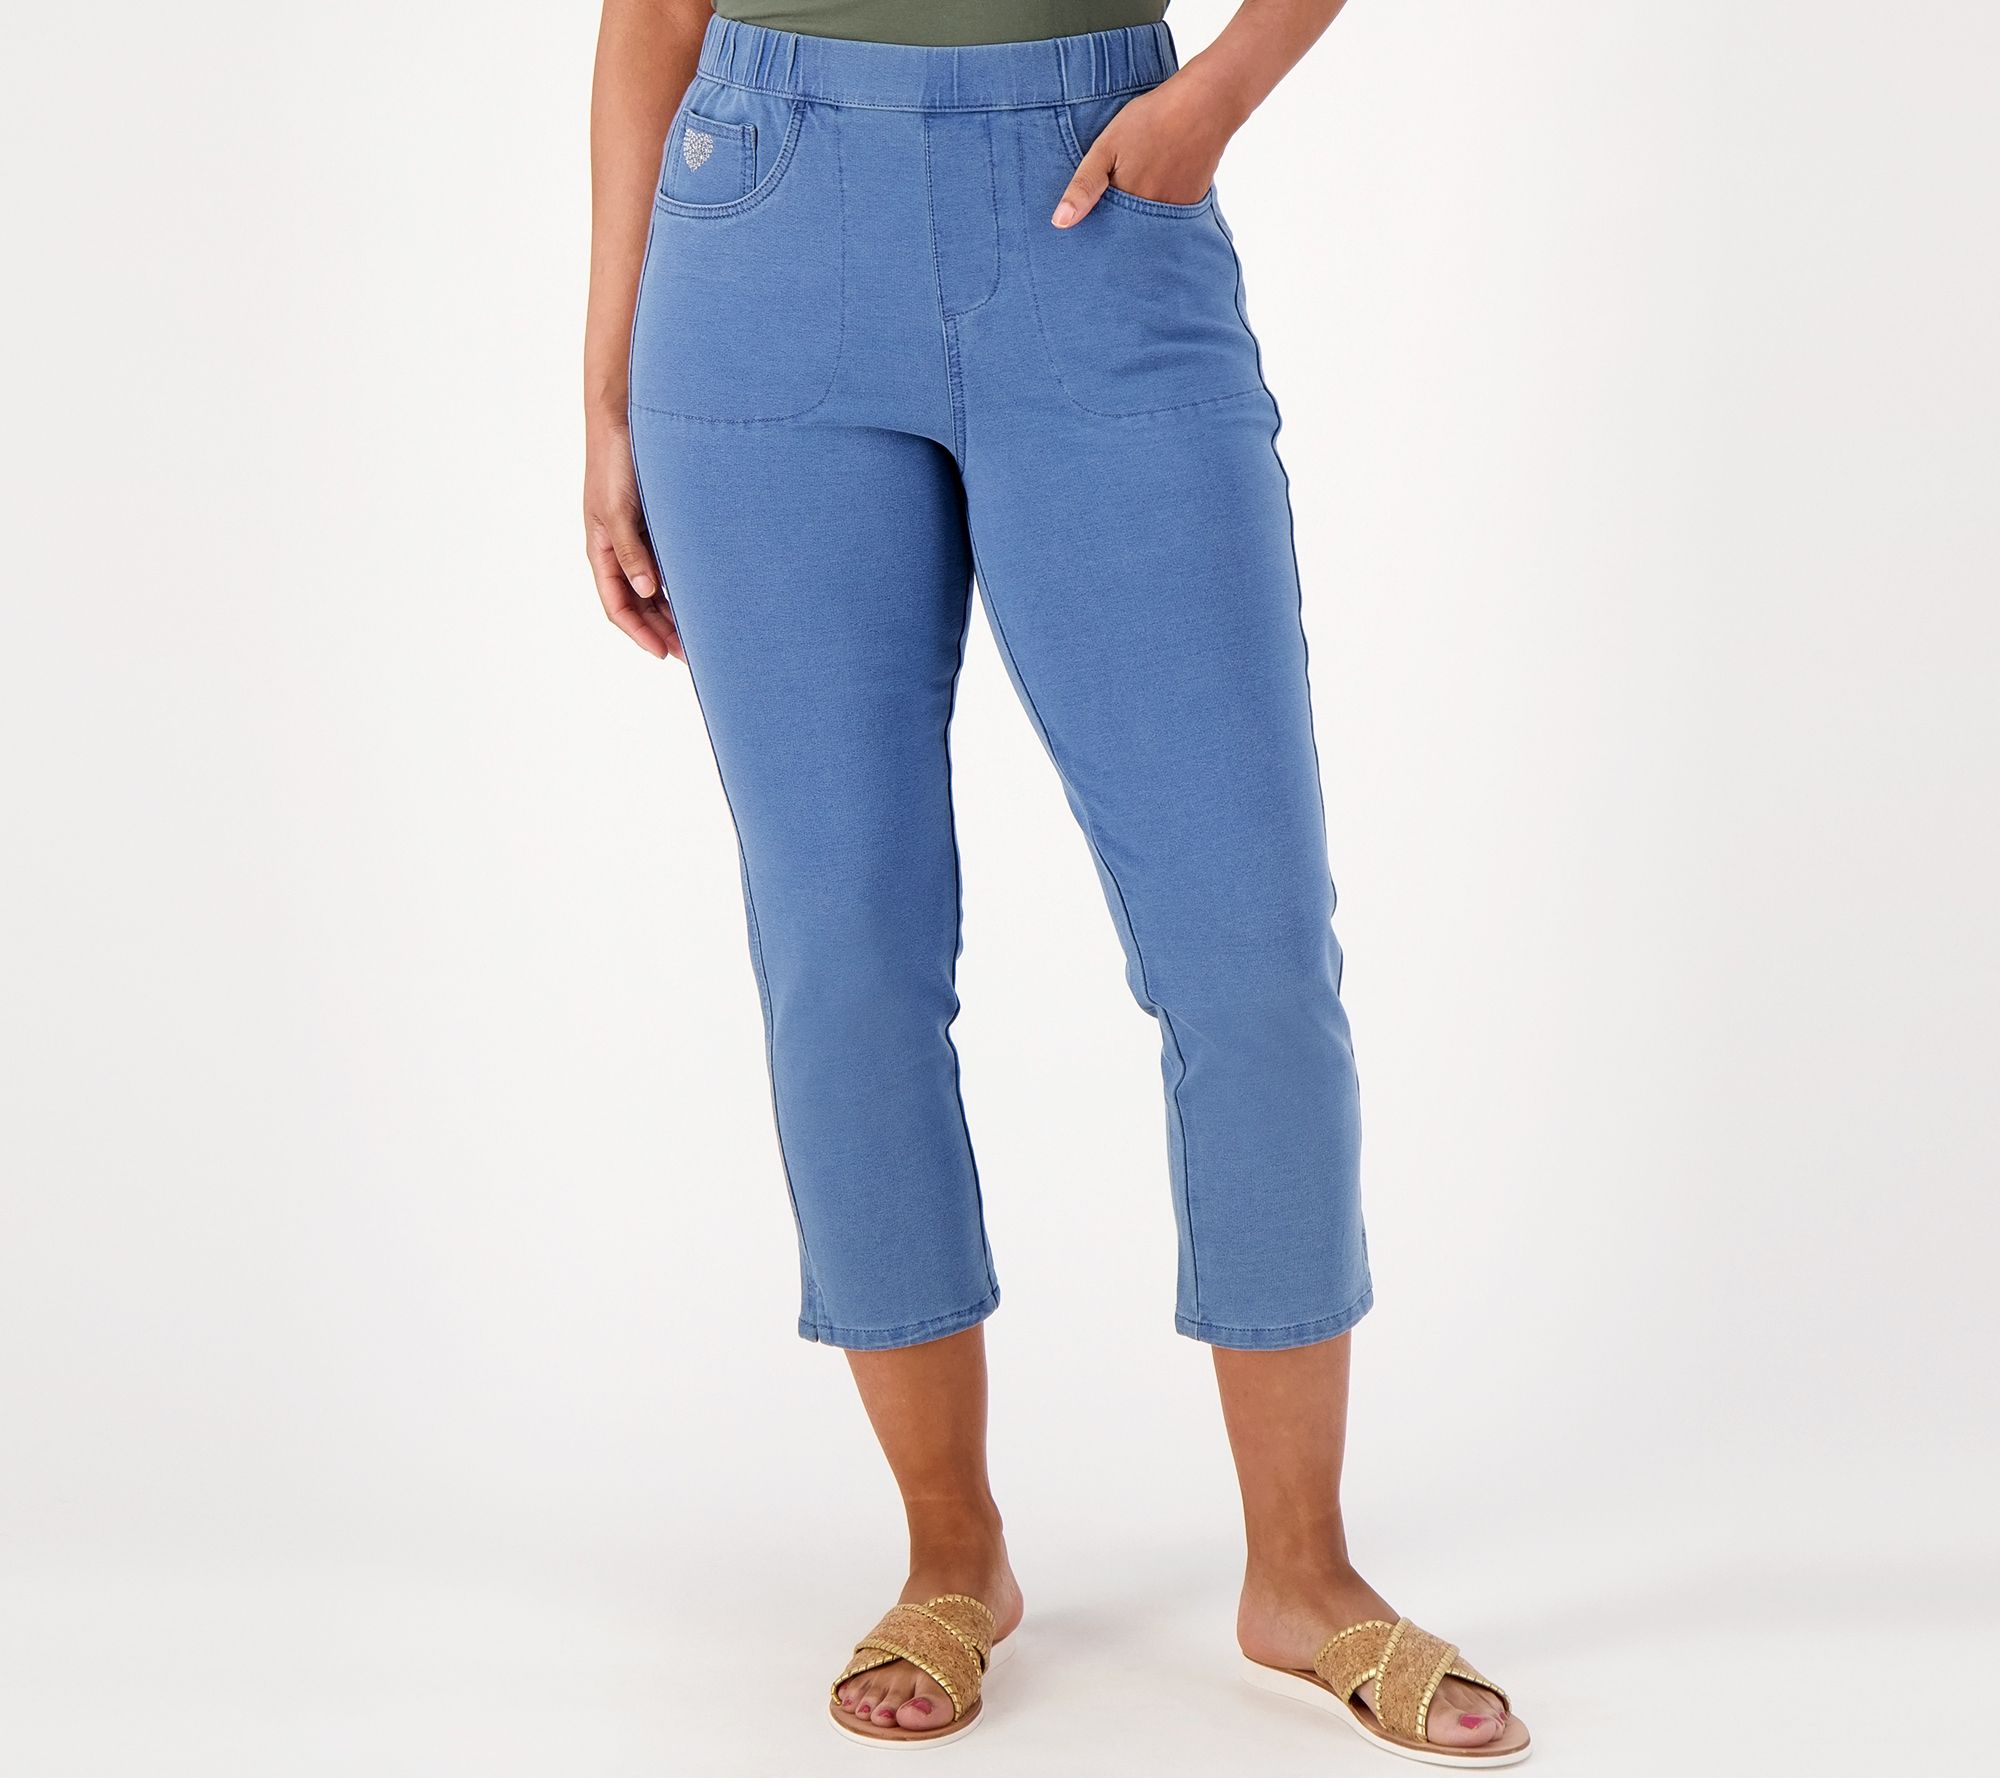 Denim & Co. Comfy Knit Air RegularStraight Crop Pant with Side